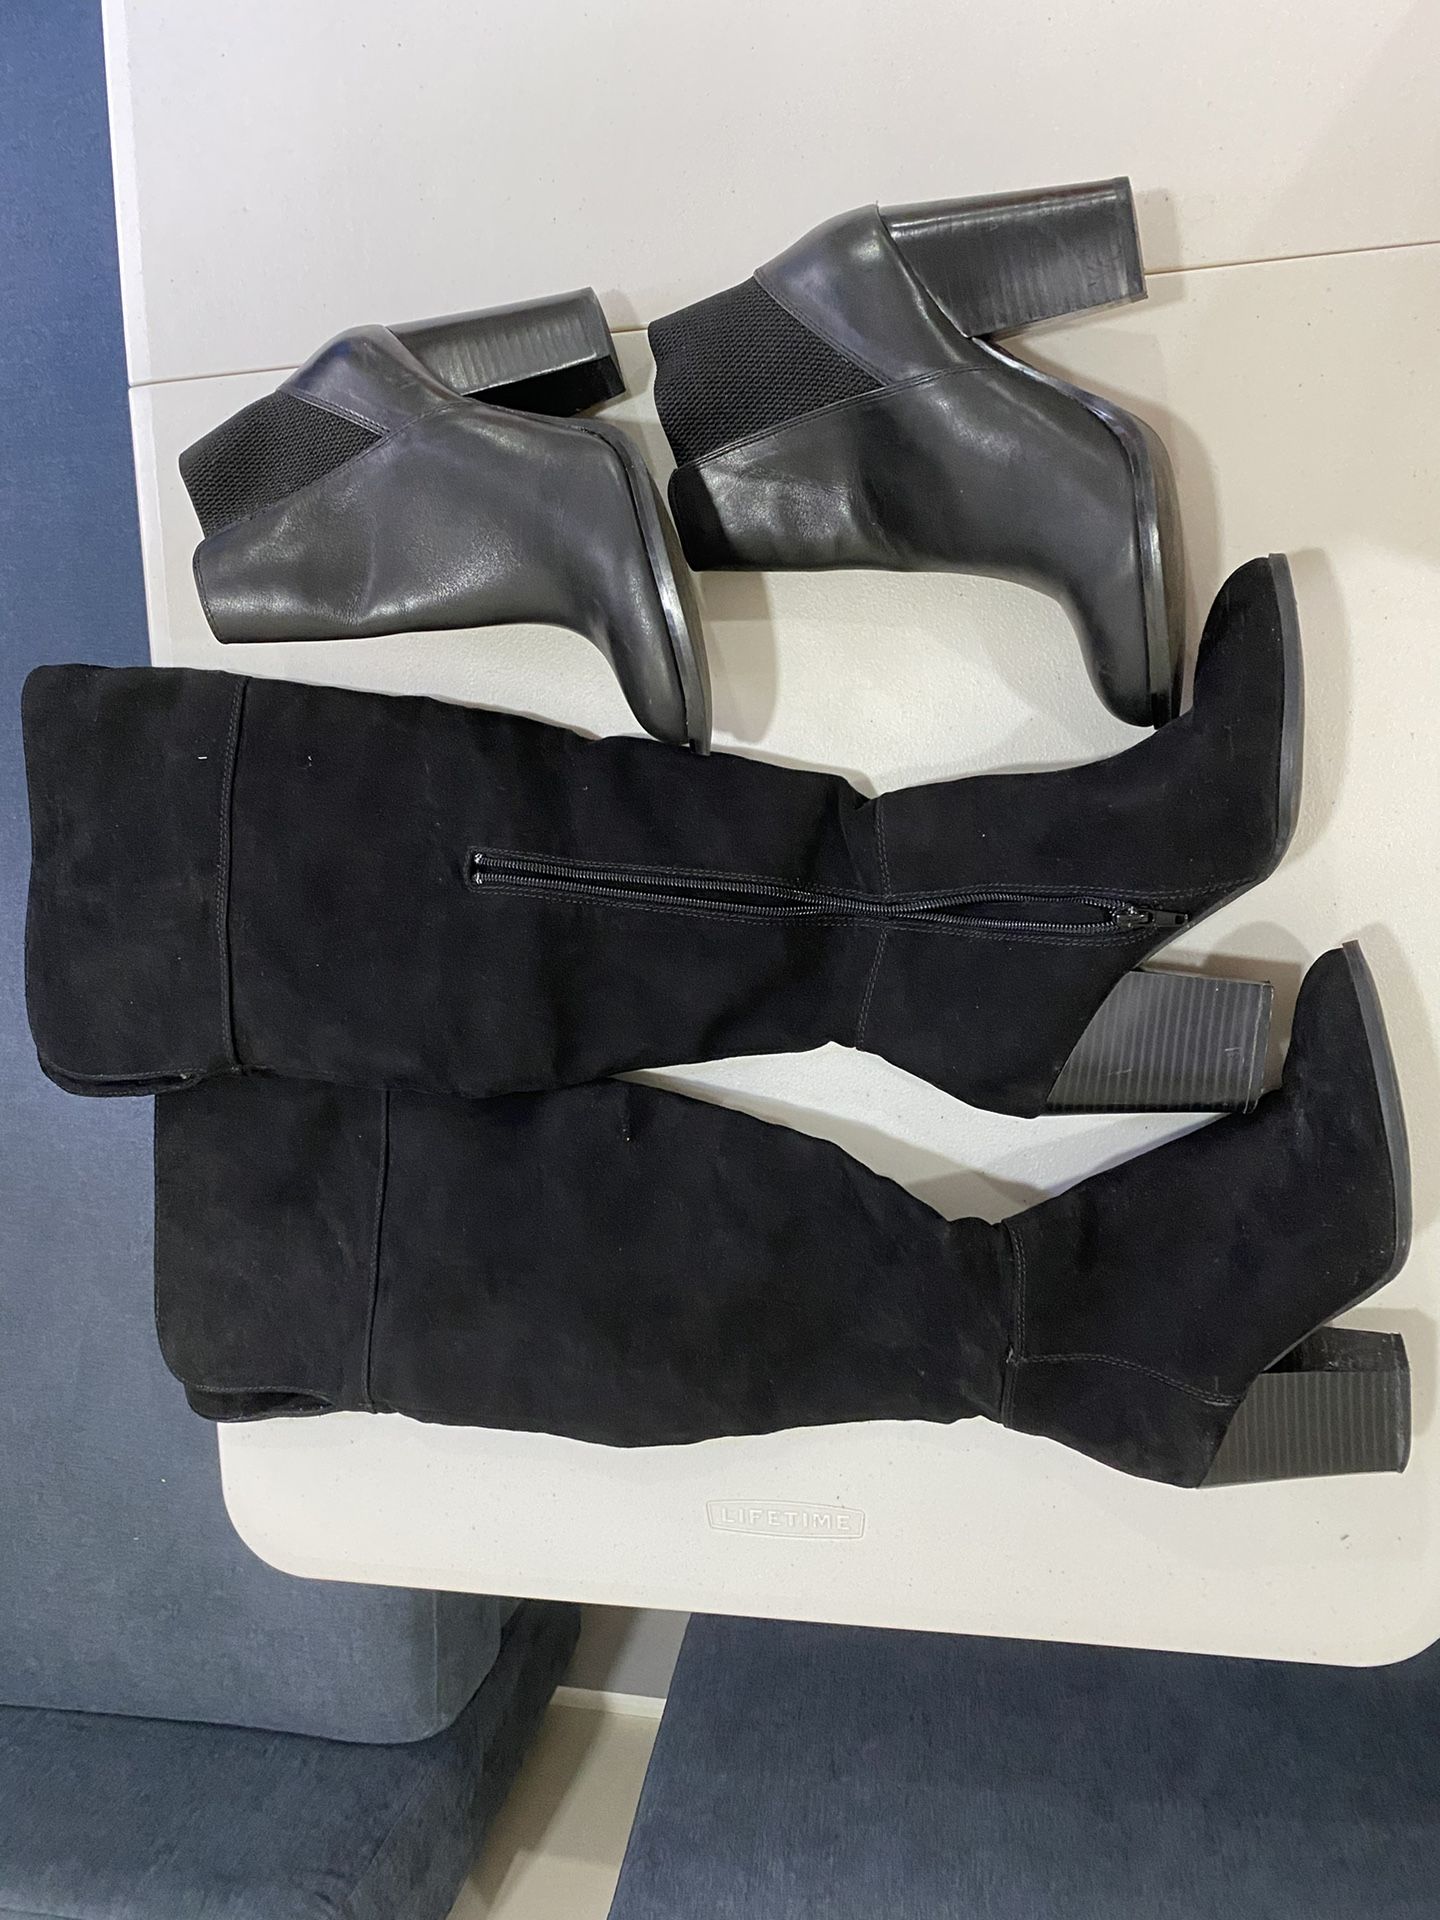 express thigh high boots size 7 and aldo boots size 7